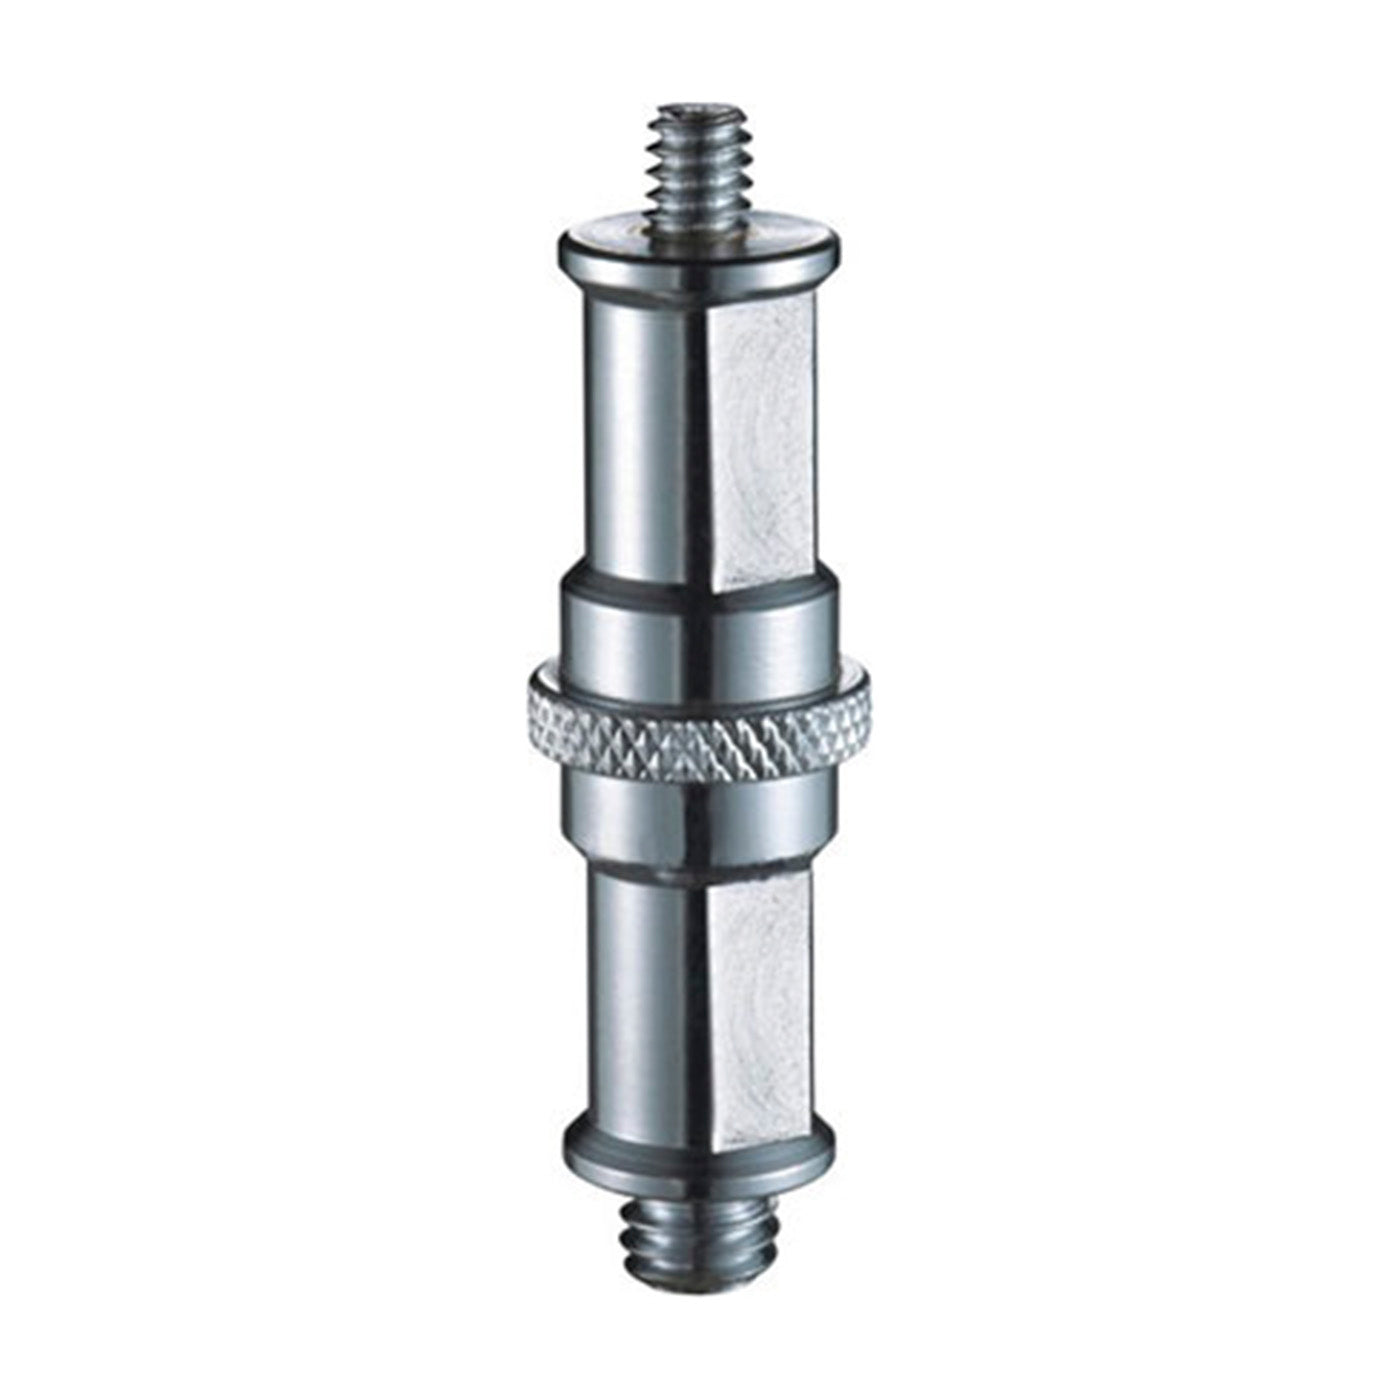 Spigot Stub Adapter with 1/4" & 3/8" Male screw Flat Face